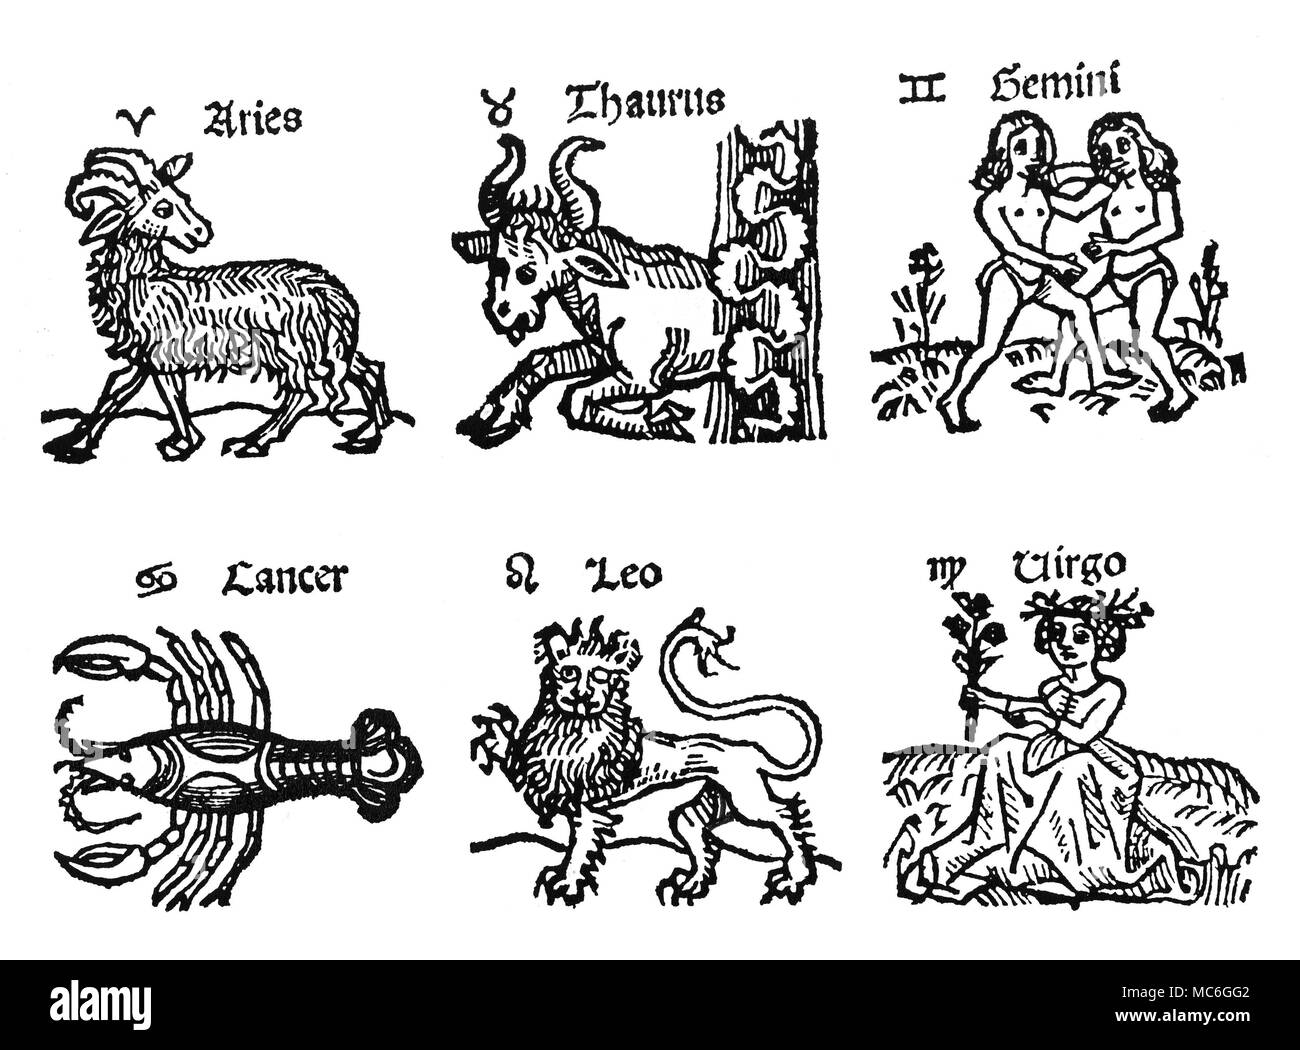 ZODIAC SIGNS The first six images of the zodiac signs, with related sigil and name. From left to right: Aries, Taurus, Gemini, Cancer, Leo and Virgo. Early 16th century. Stock Photo